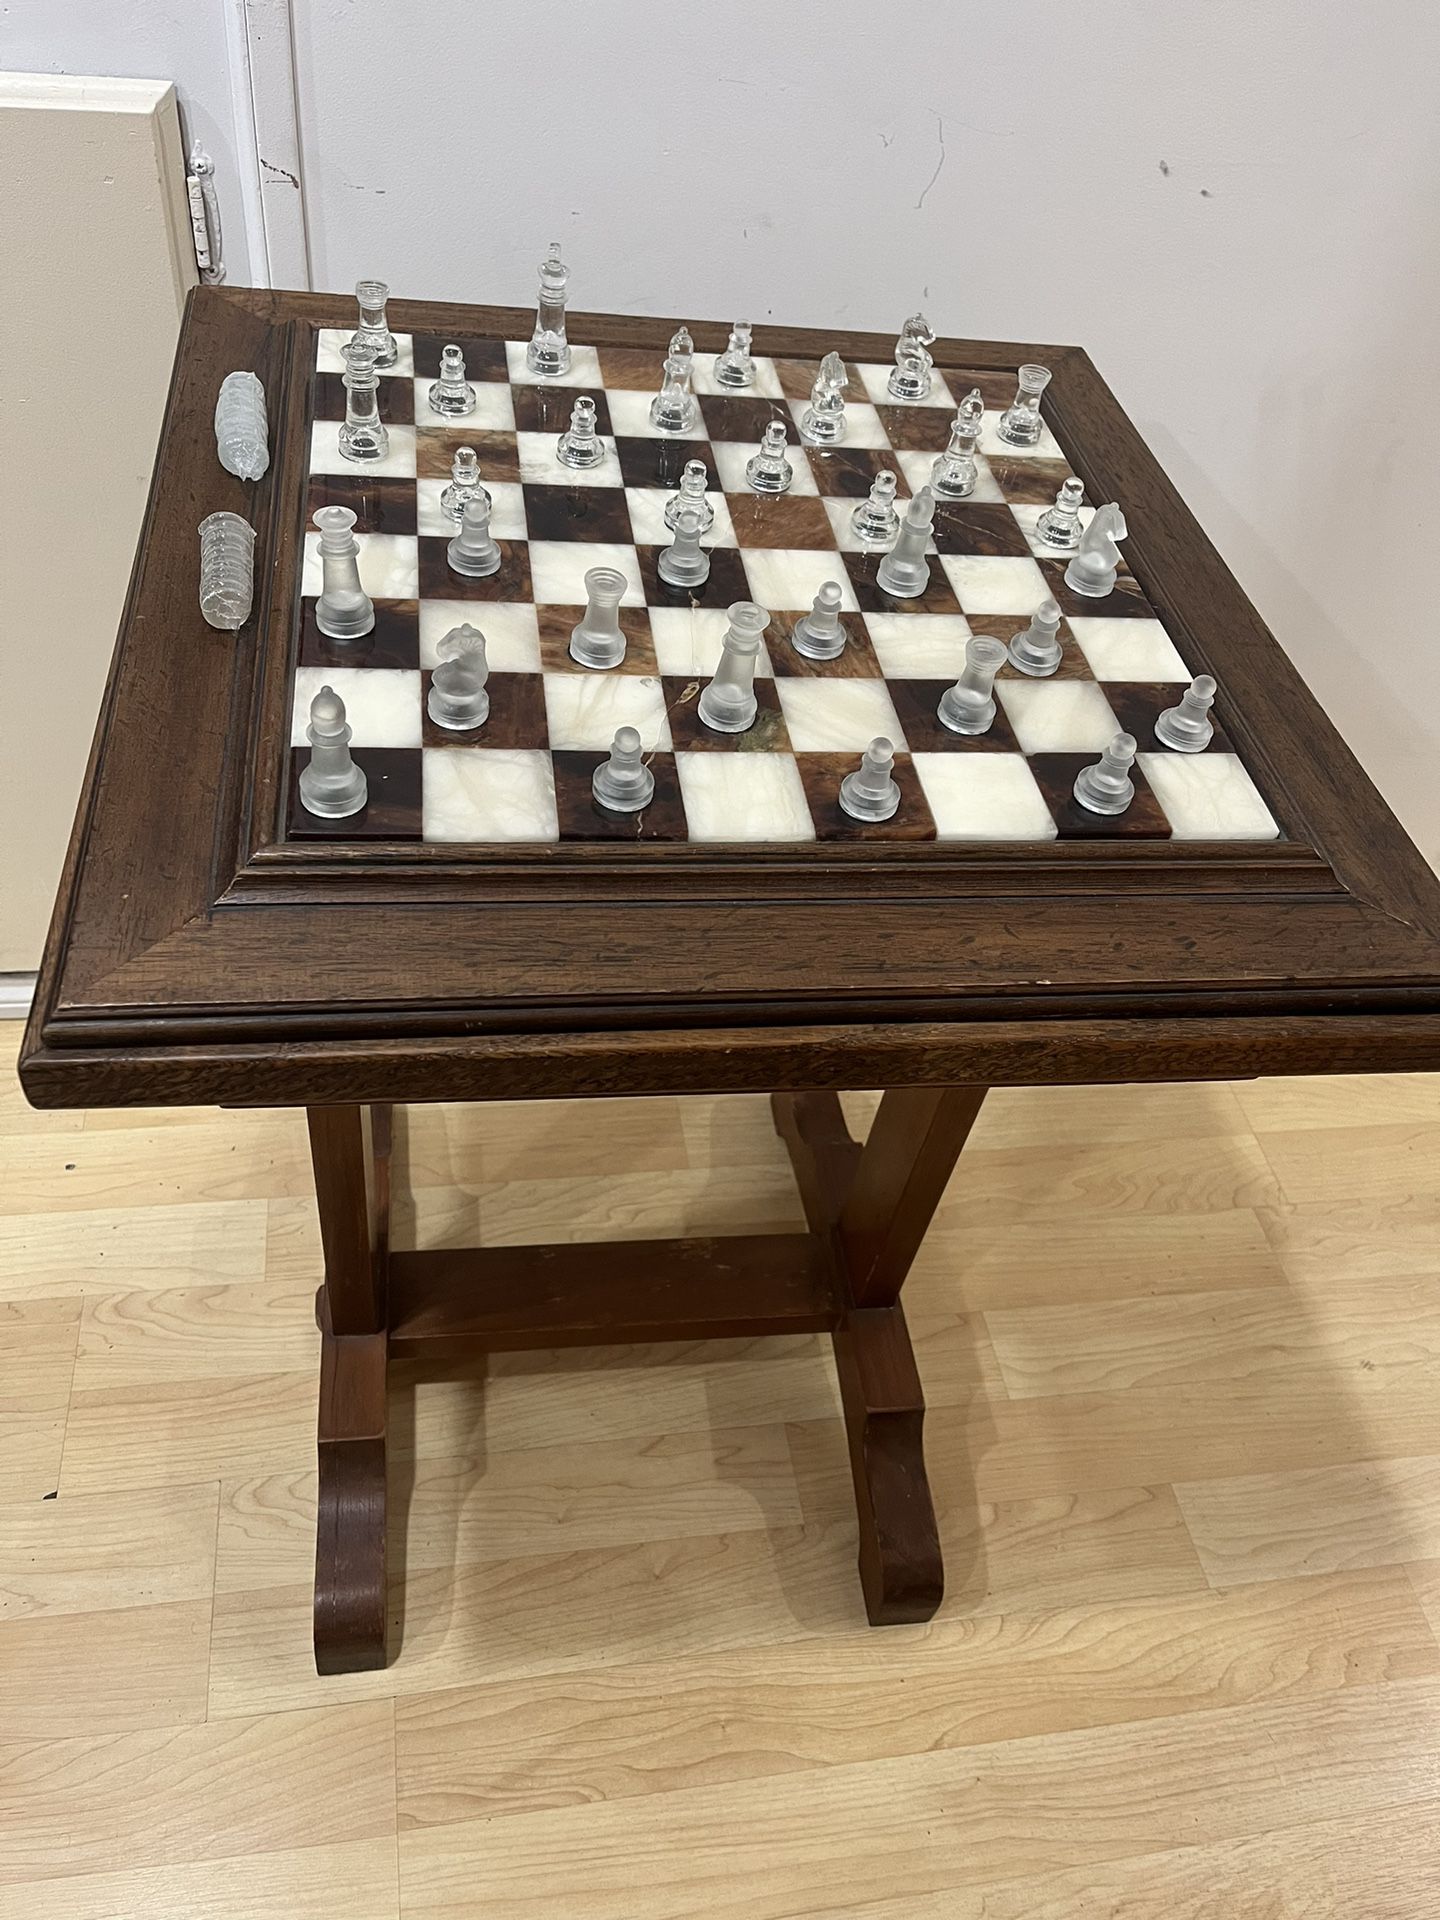 Wooden Chess Table/ Side Table W/ Elegant Marble Chess Board 